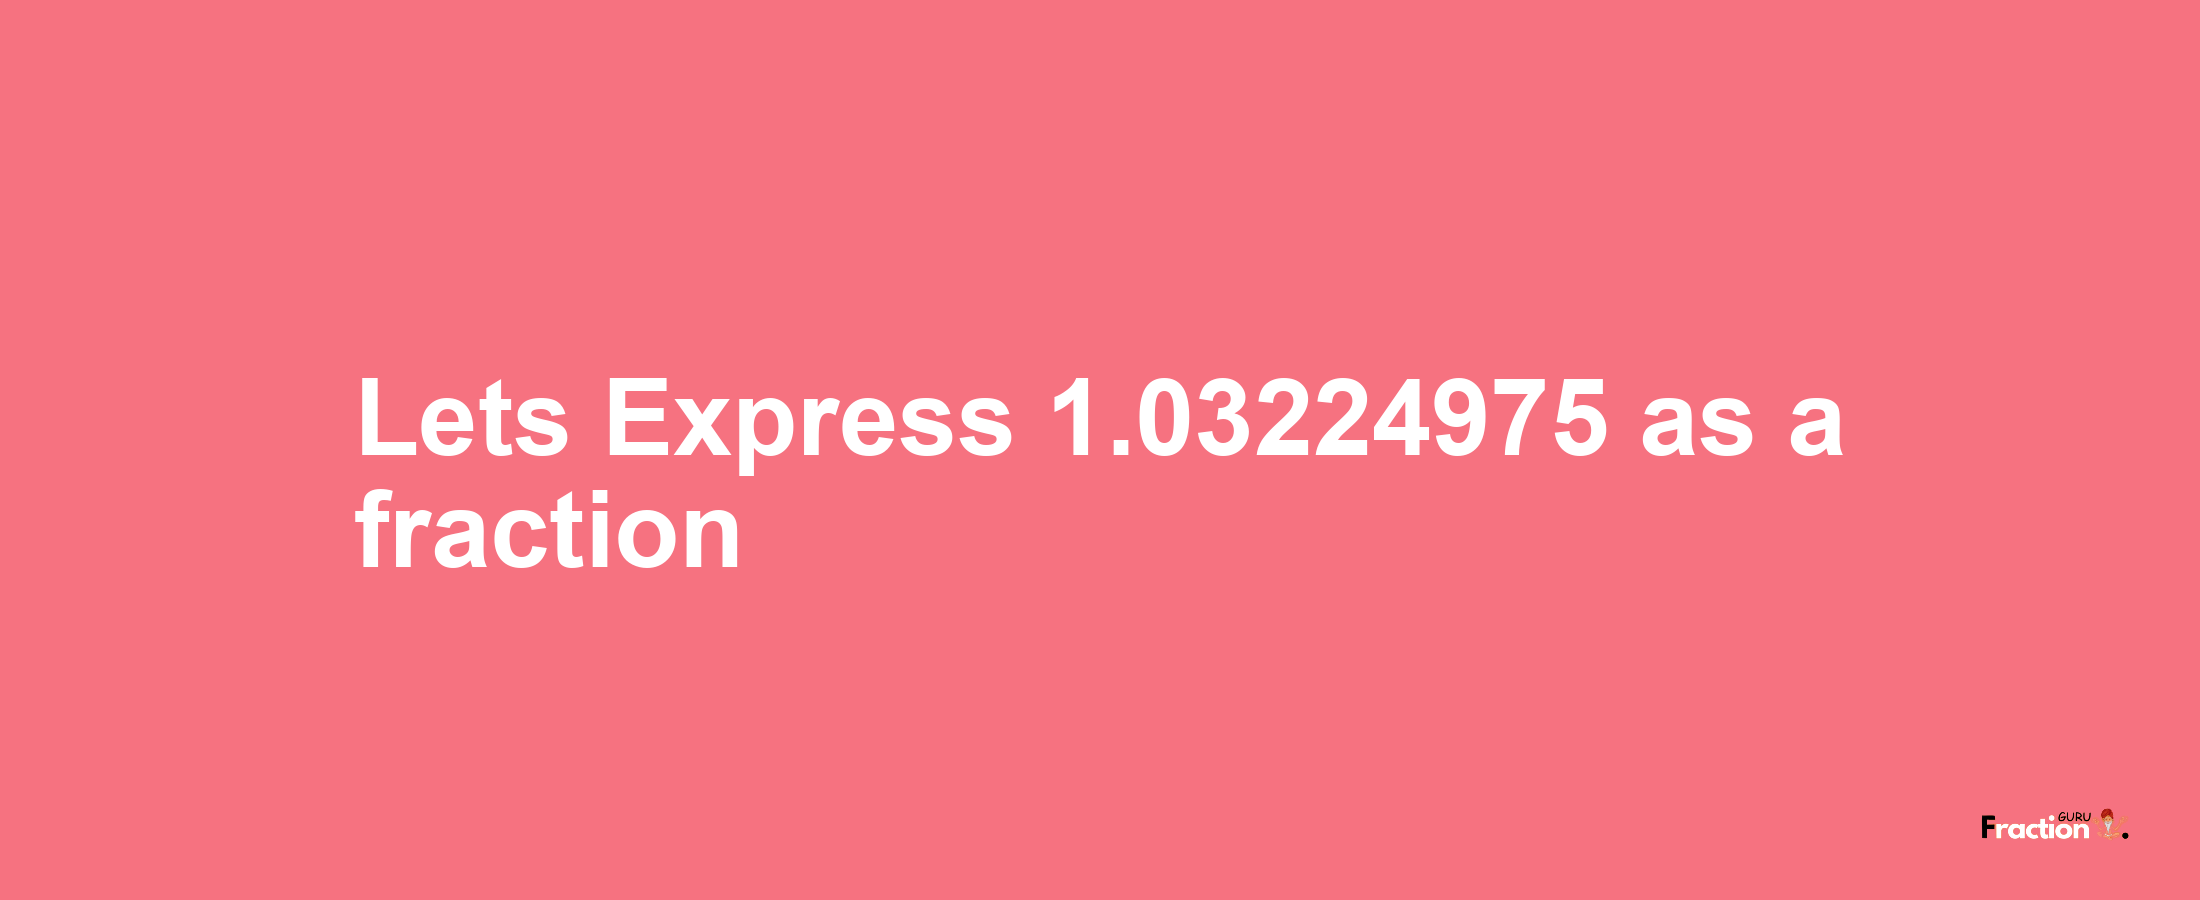 Lets Express 1.03224975 as afraction